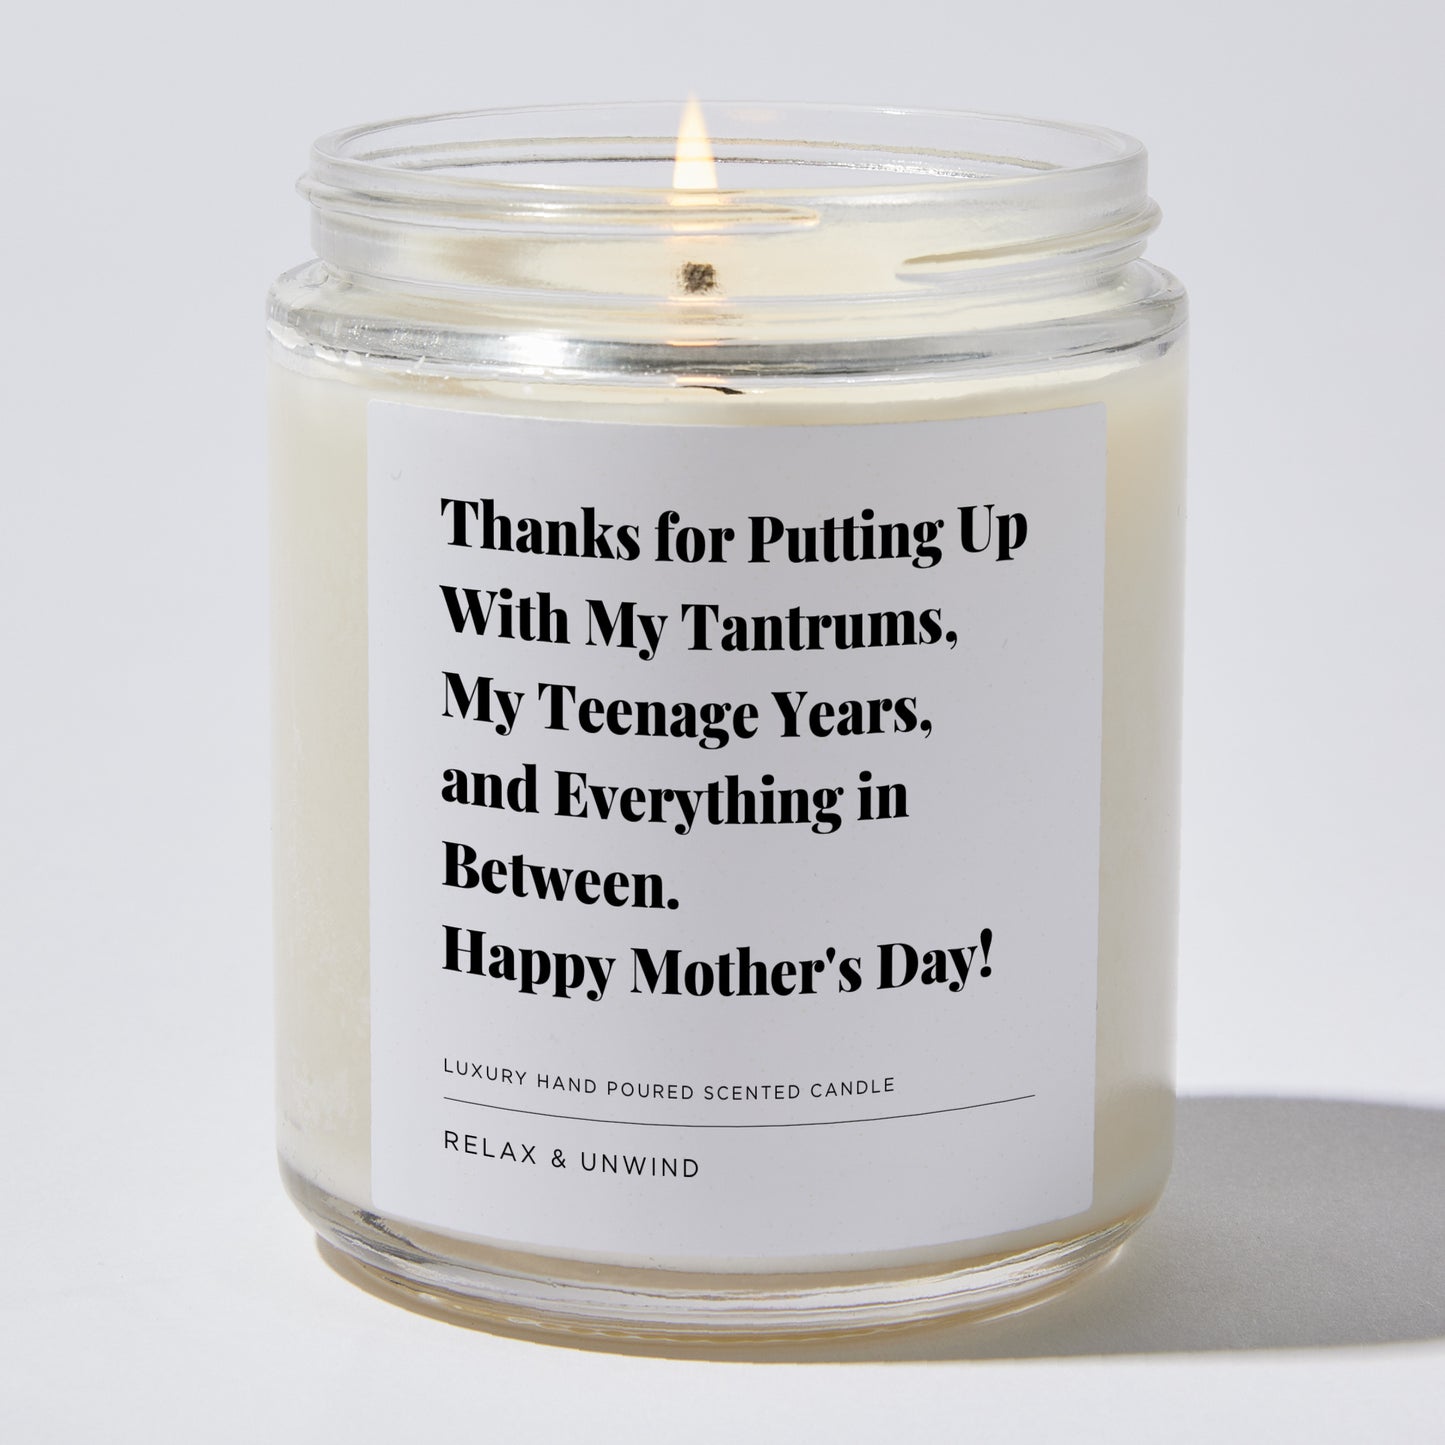 Gift for Mom - Thanks for putting up with my tantrums, my teenage years, and everything in between. Happy Mother's Day! - Candle